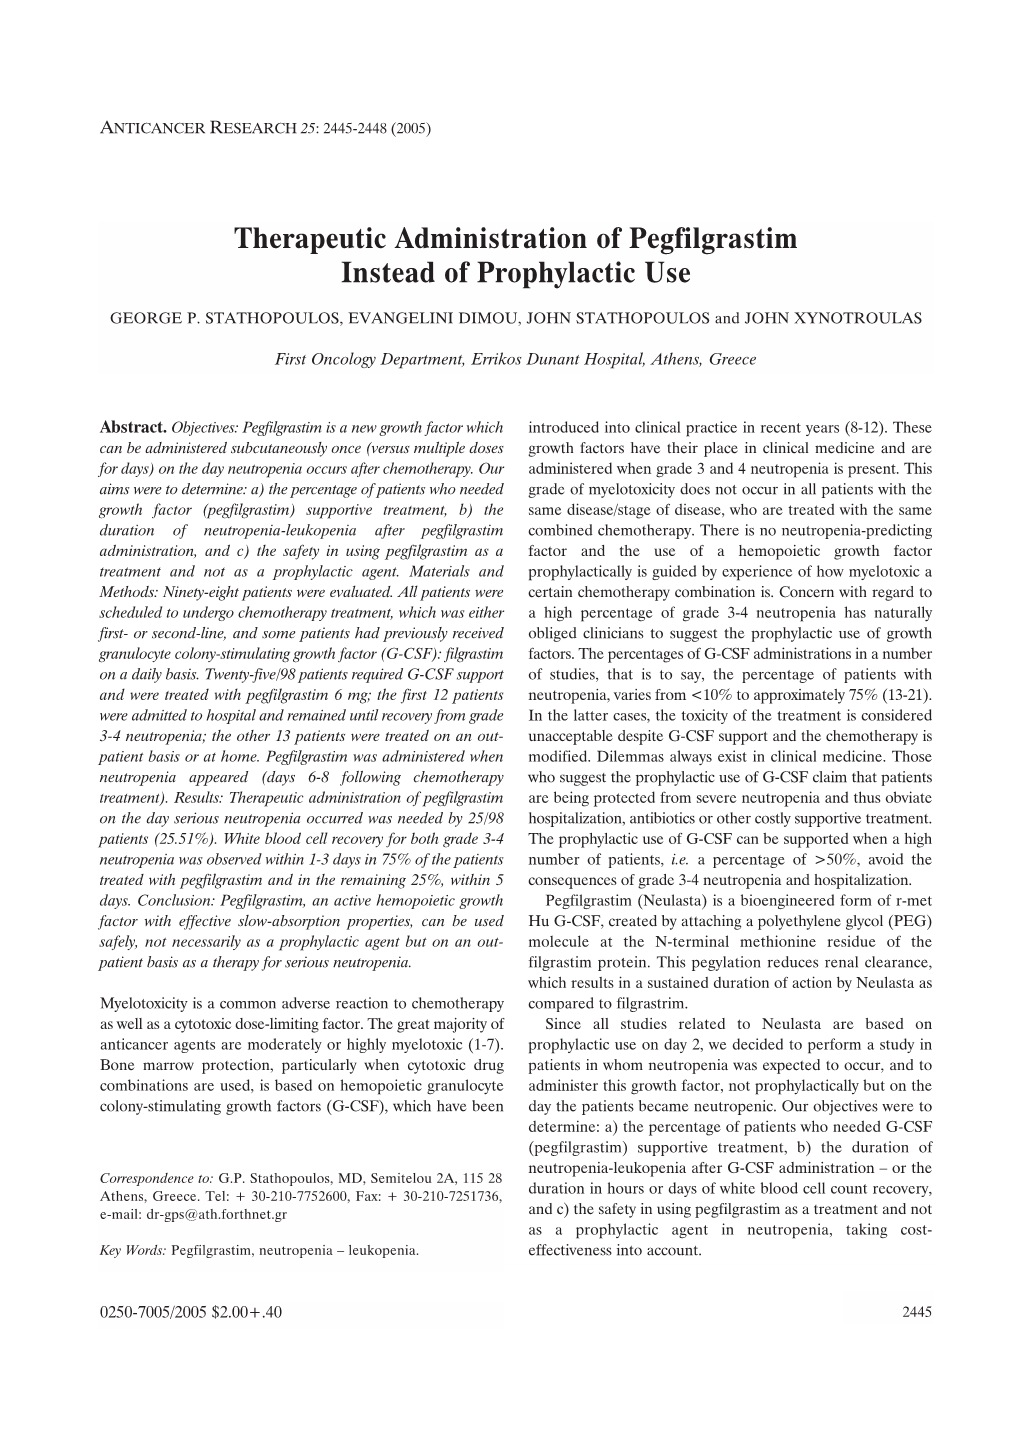 Therapeutic Administration of Pegfilgrastim Instead of Prophylactic Use